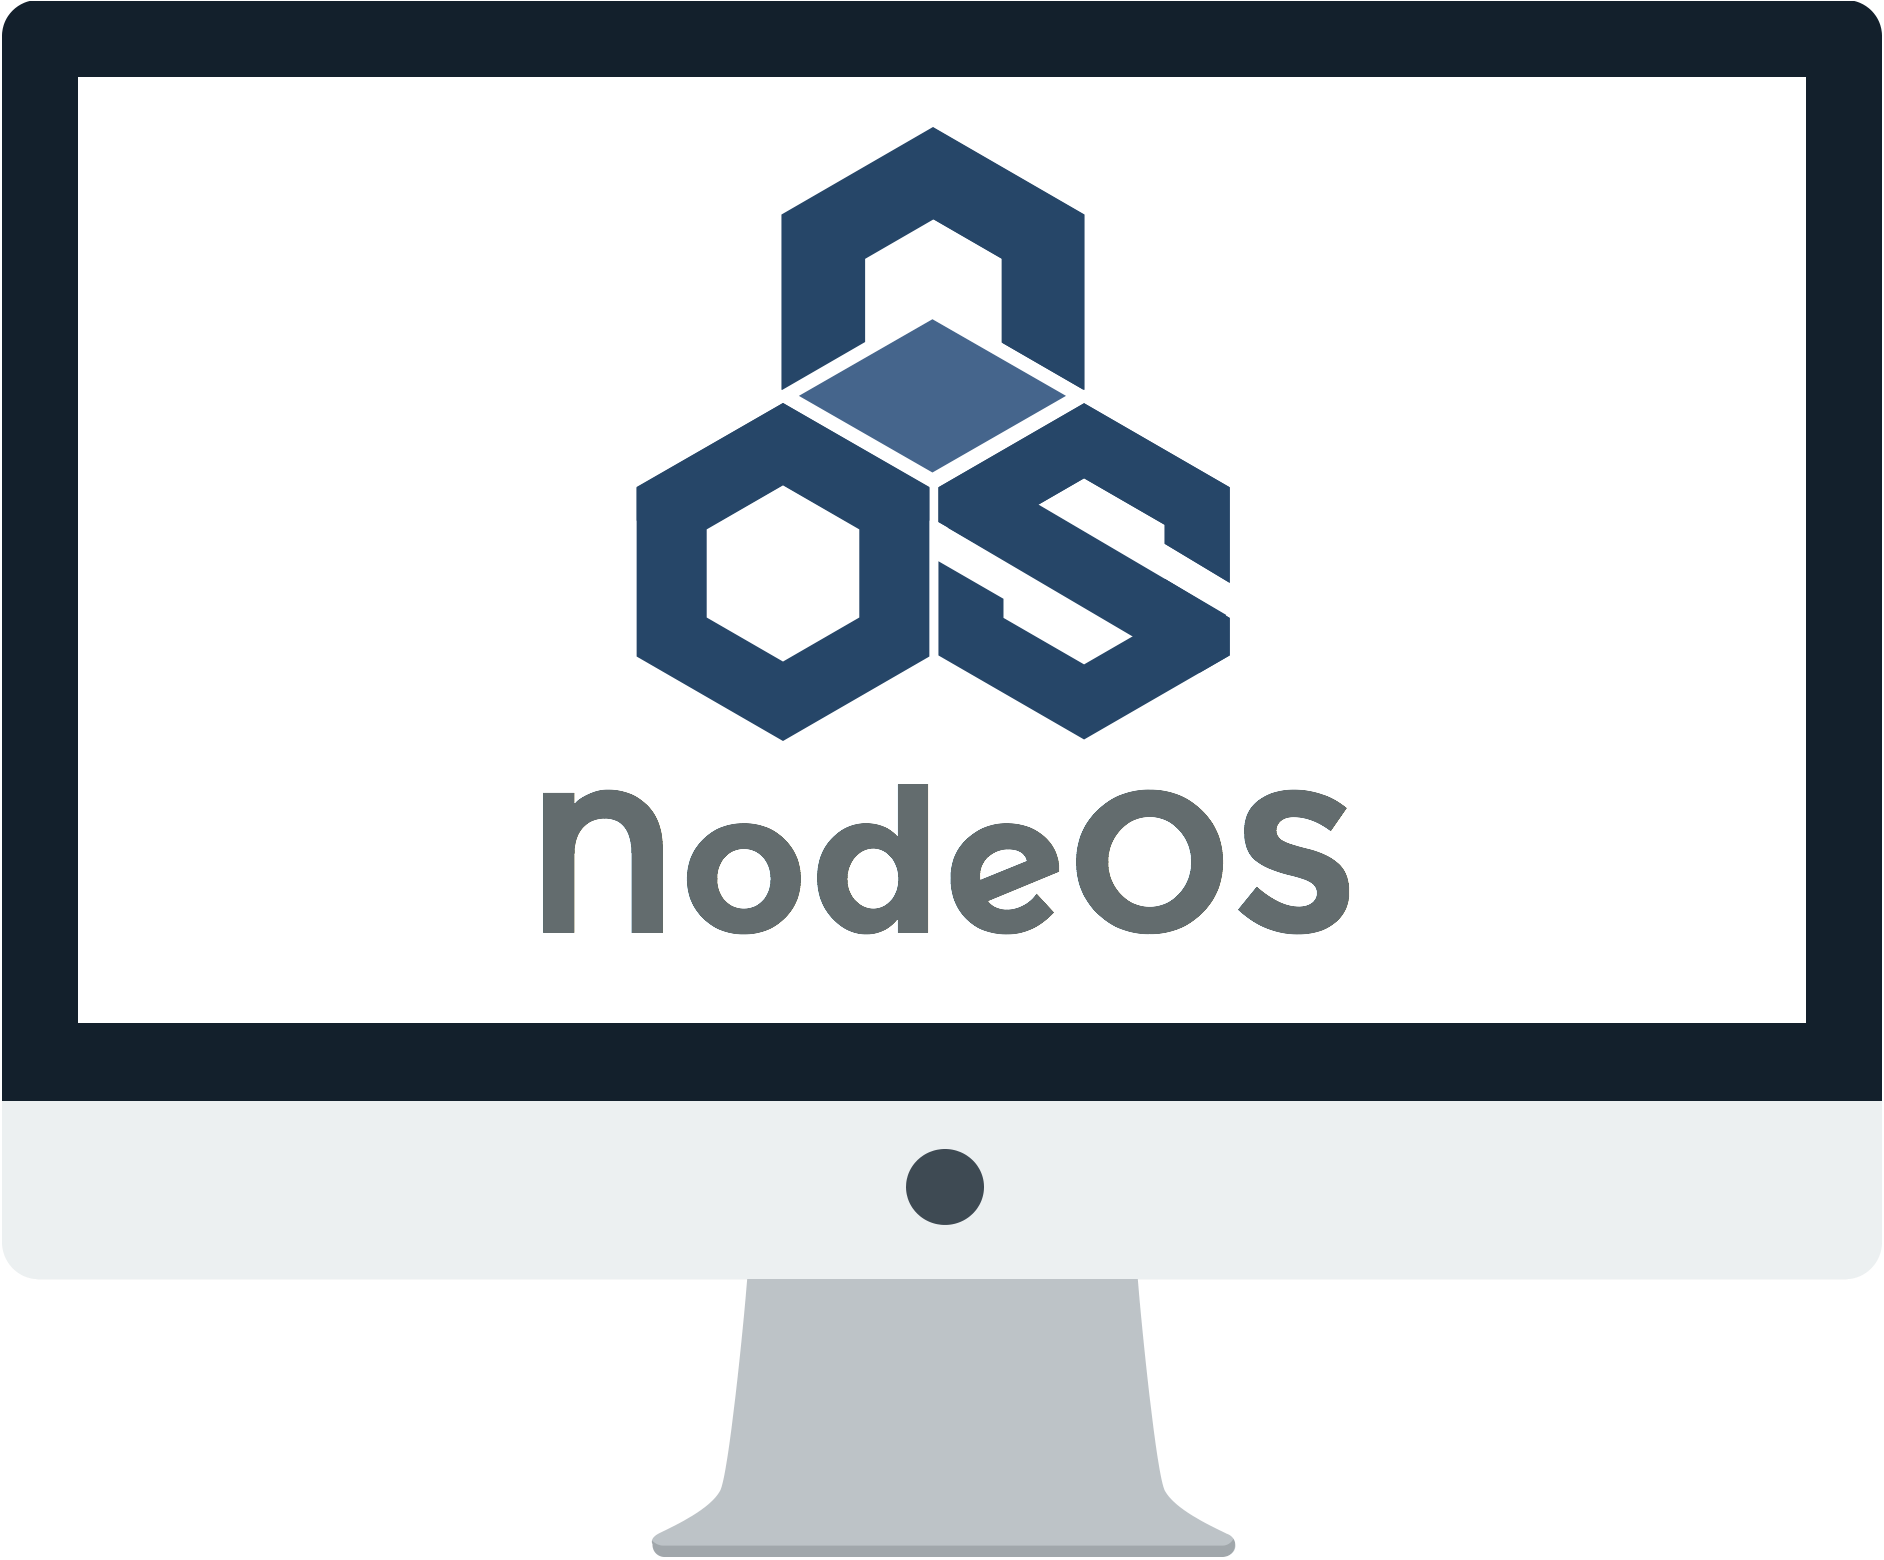 NodeOS: how much is too much?